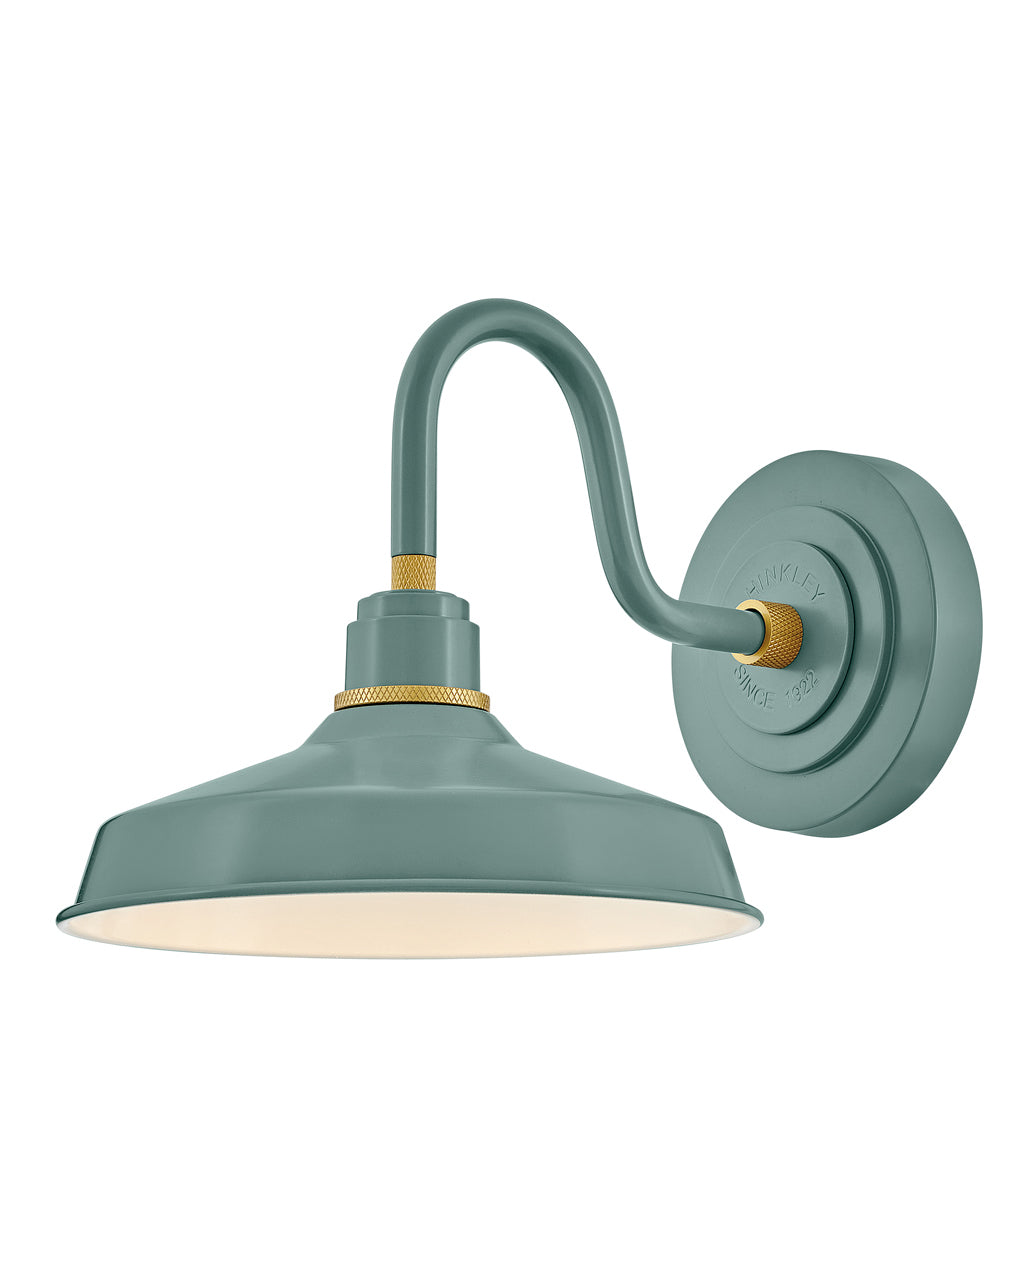 OUTDOOR FOUNDRY CLASSIC Gooseneck Barn Light Outdoor l Wall Hinkley Sage Green 13.25x9.5x9.25 